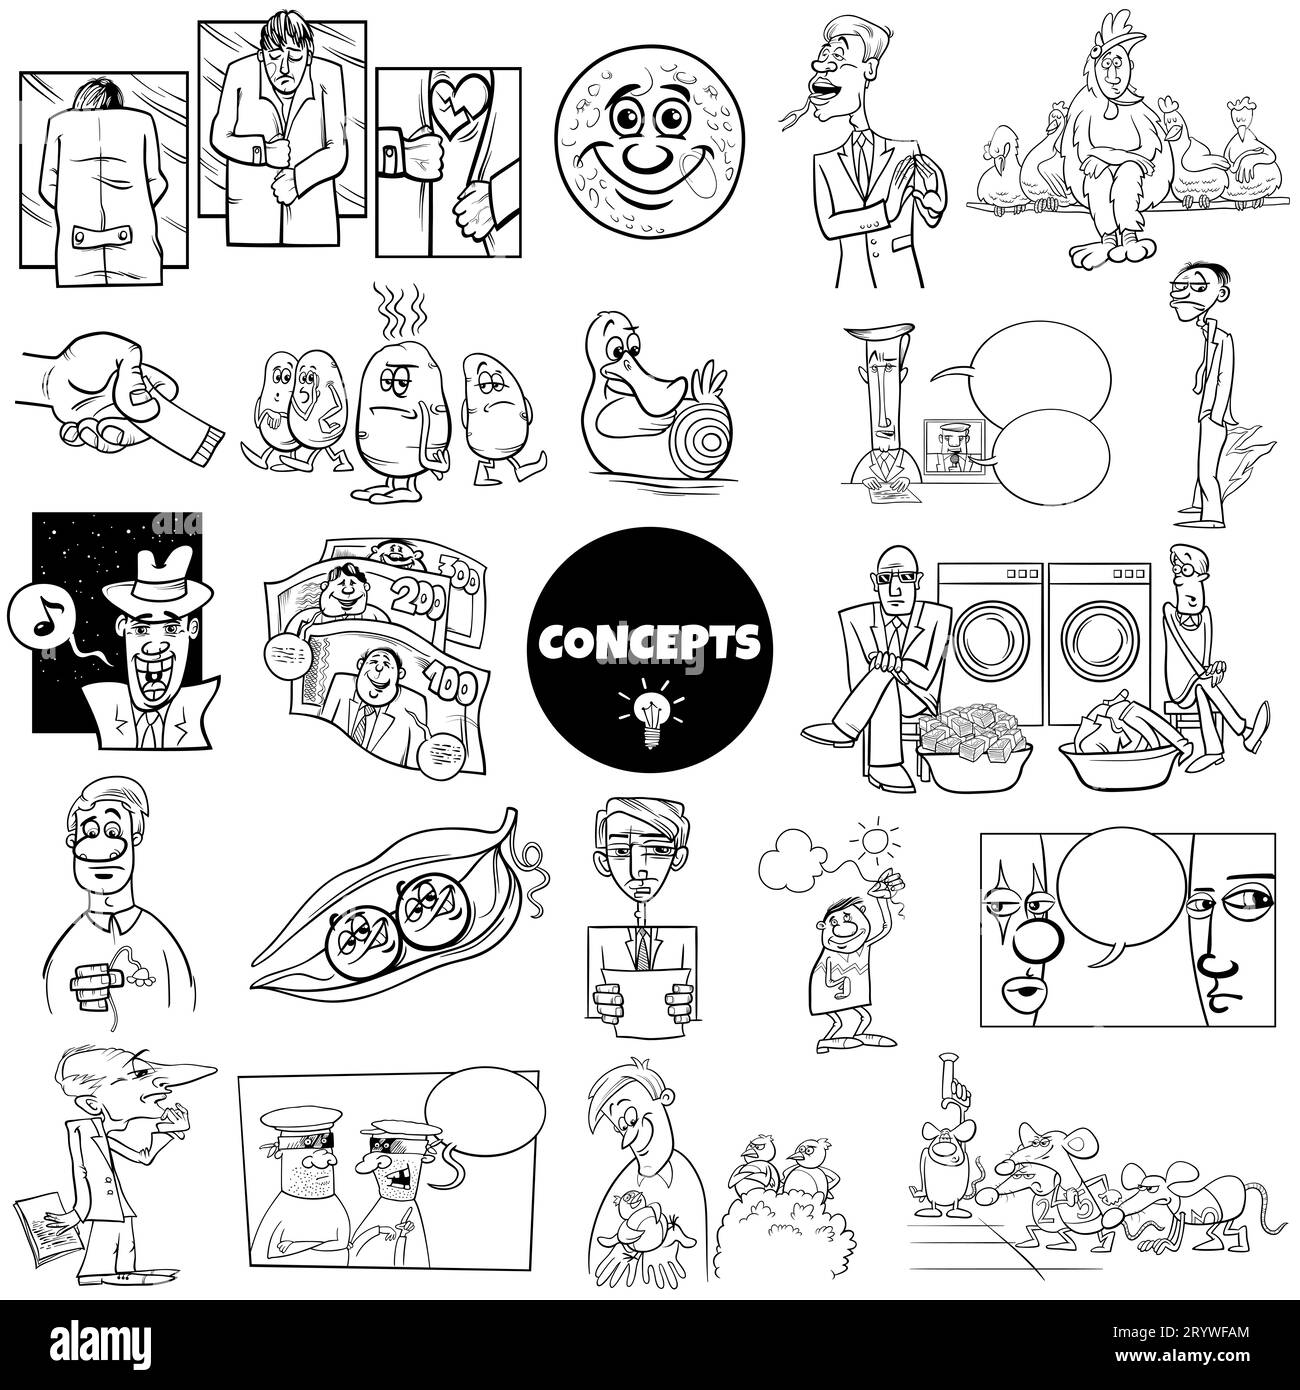 Black and white ilustration set of humorous cartoon concepts or metaphors and ideas with comic characters Stock Photo